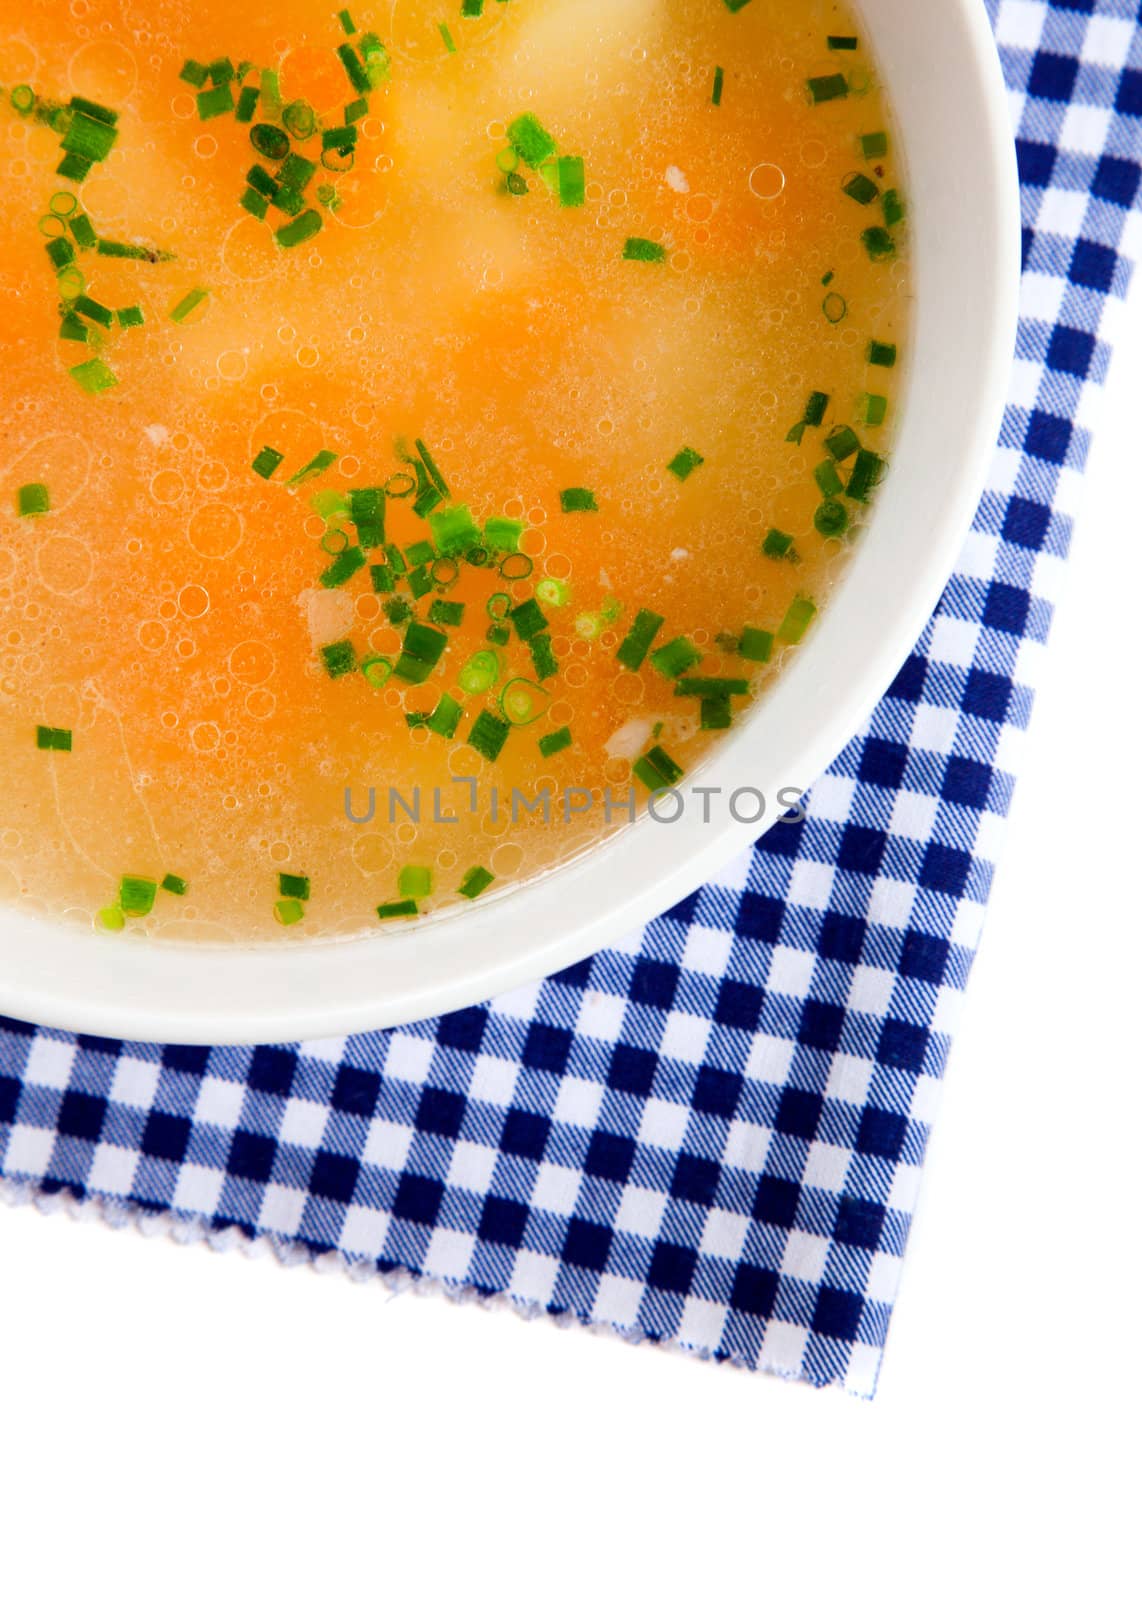 Vegetable soup, Isolated on white background by motorolka